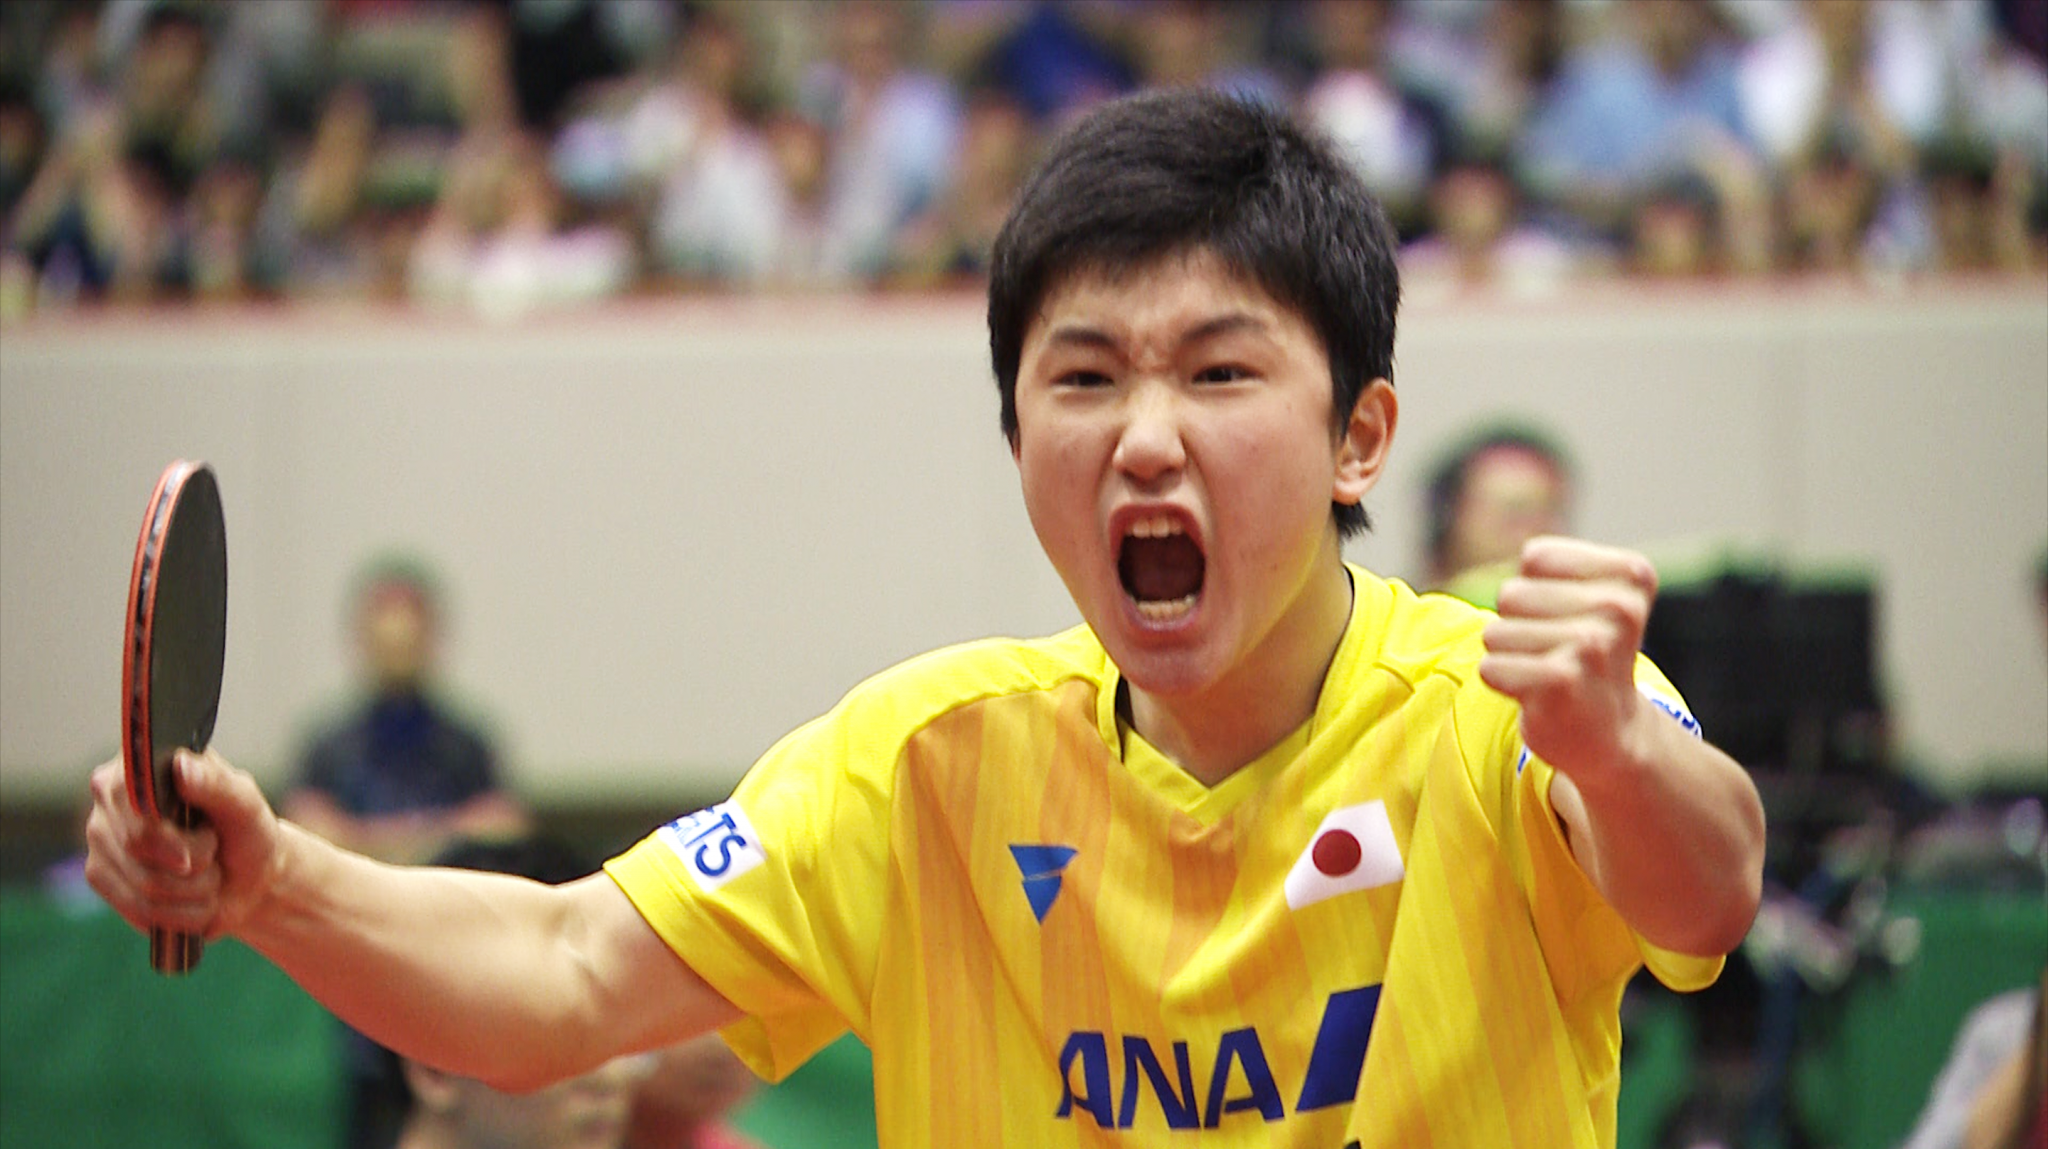 Fourteen-year-old ace Harimoto continues remarkable rise with ITTF Japan Open title